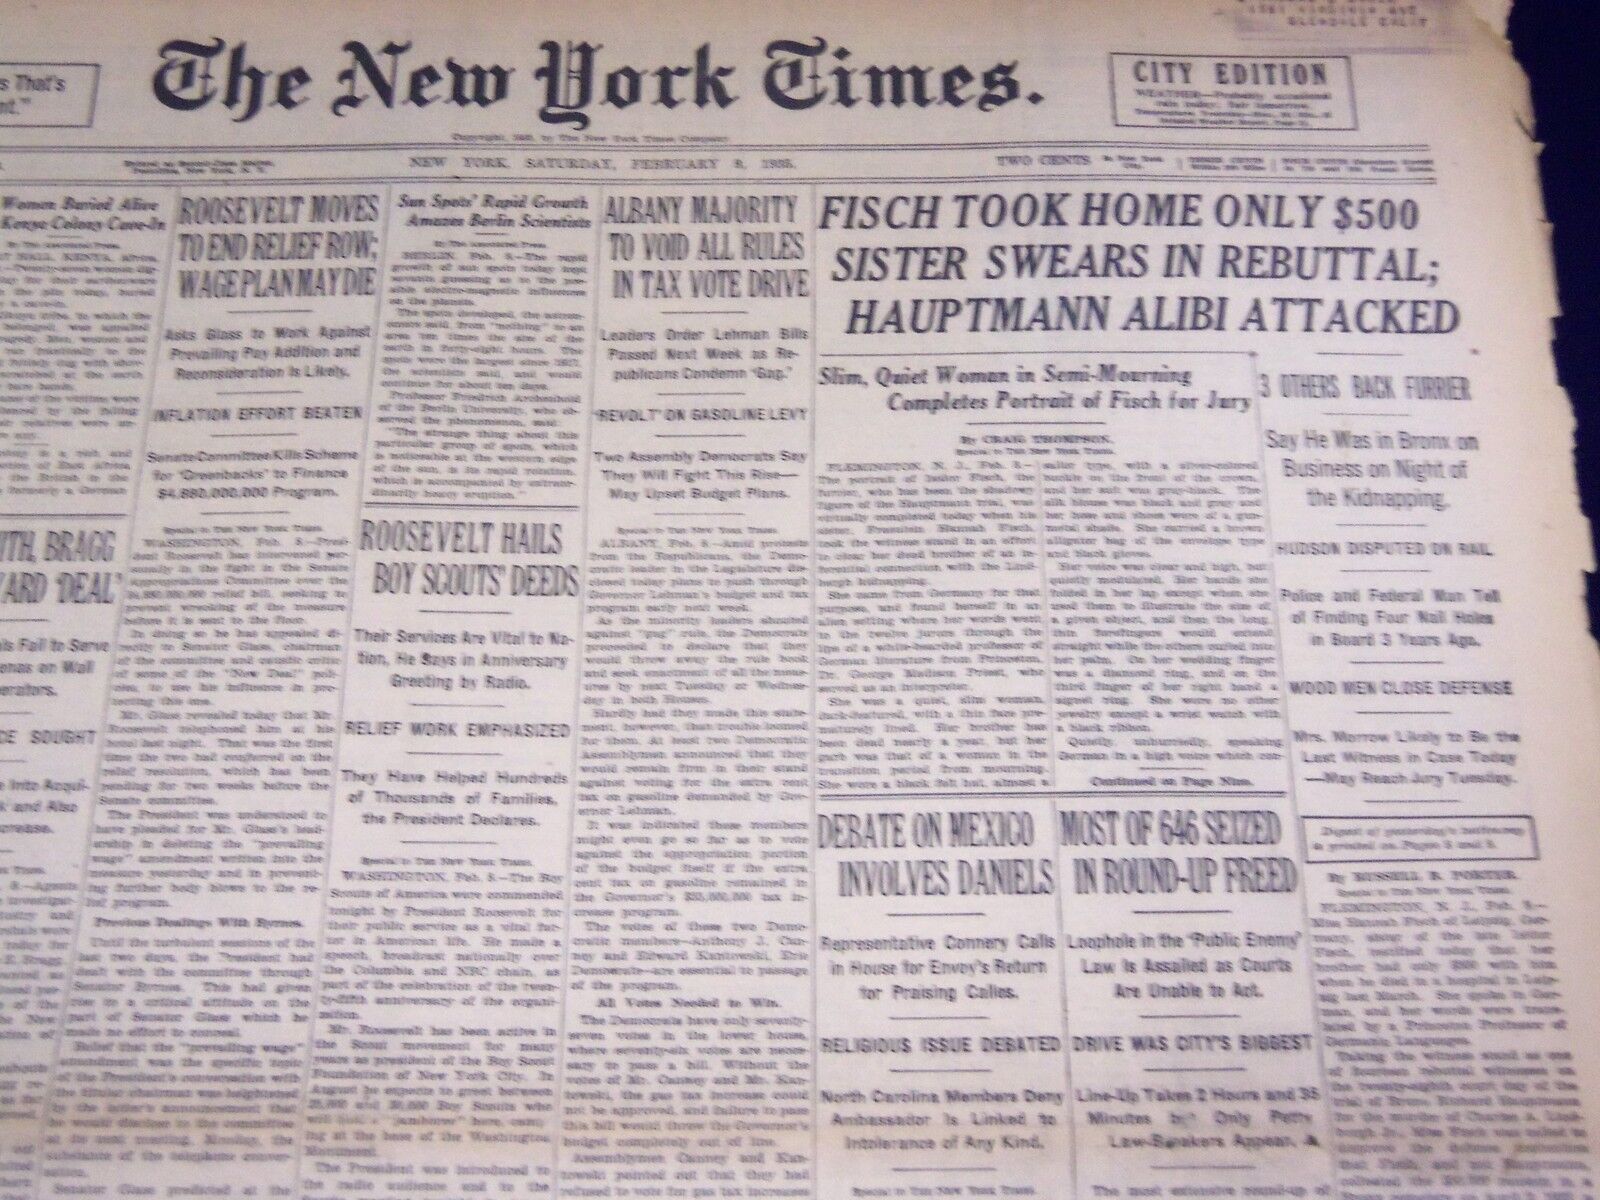 1935 FEB 9 NEW YORK TIMES - FISCH TOOK HOME ONLY $500 SISTER SWEARS - NT 1917